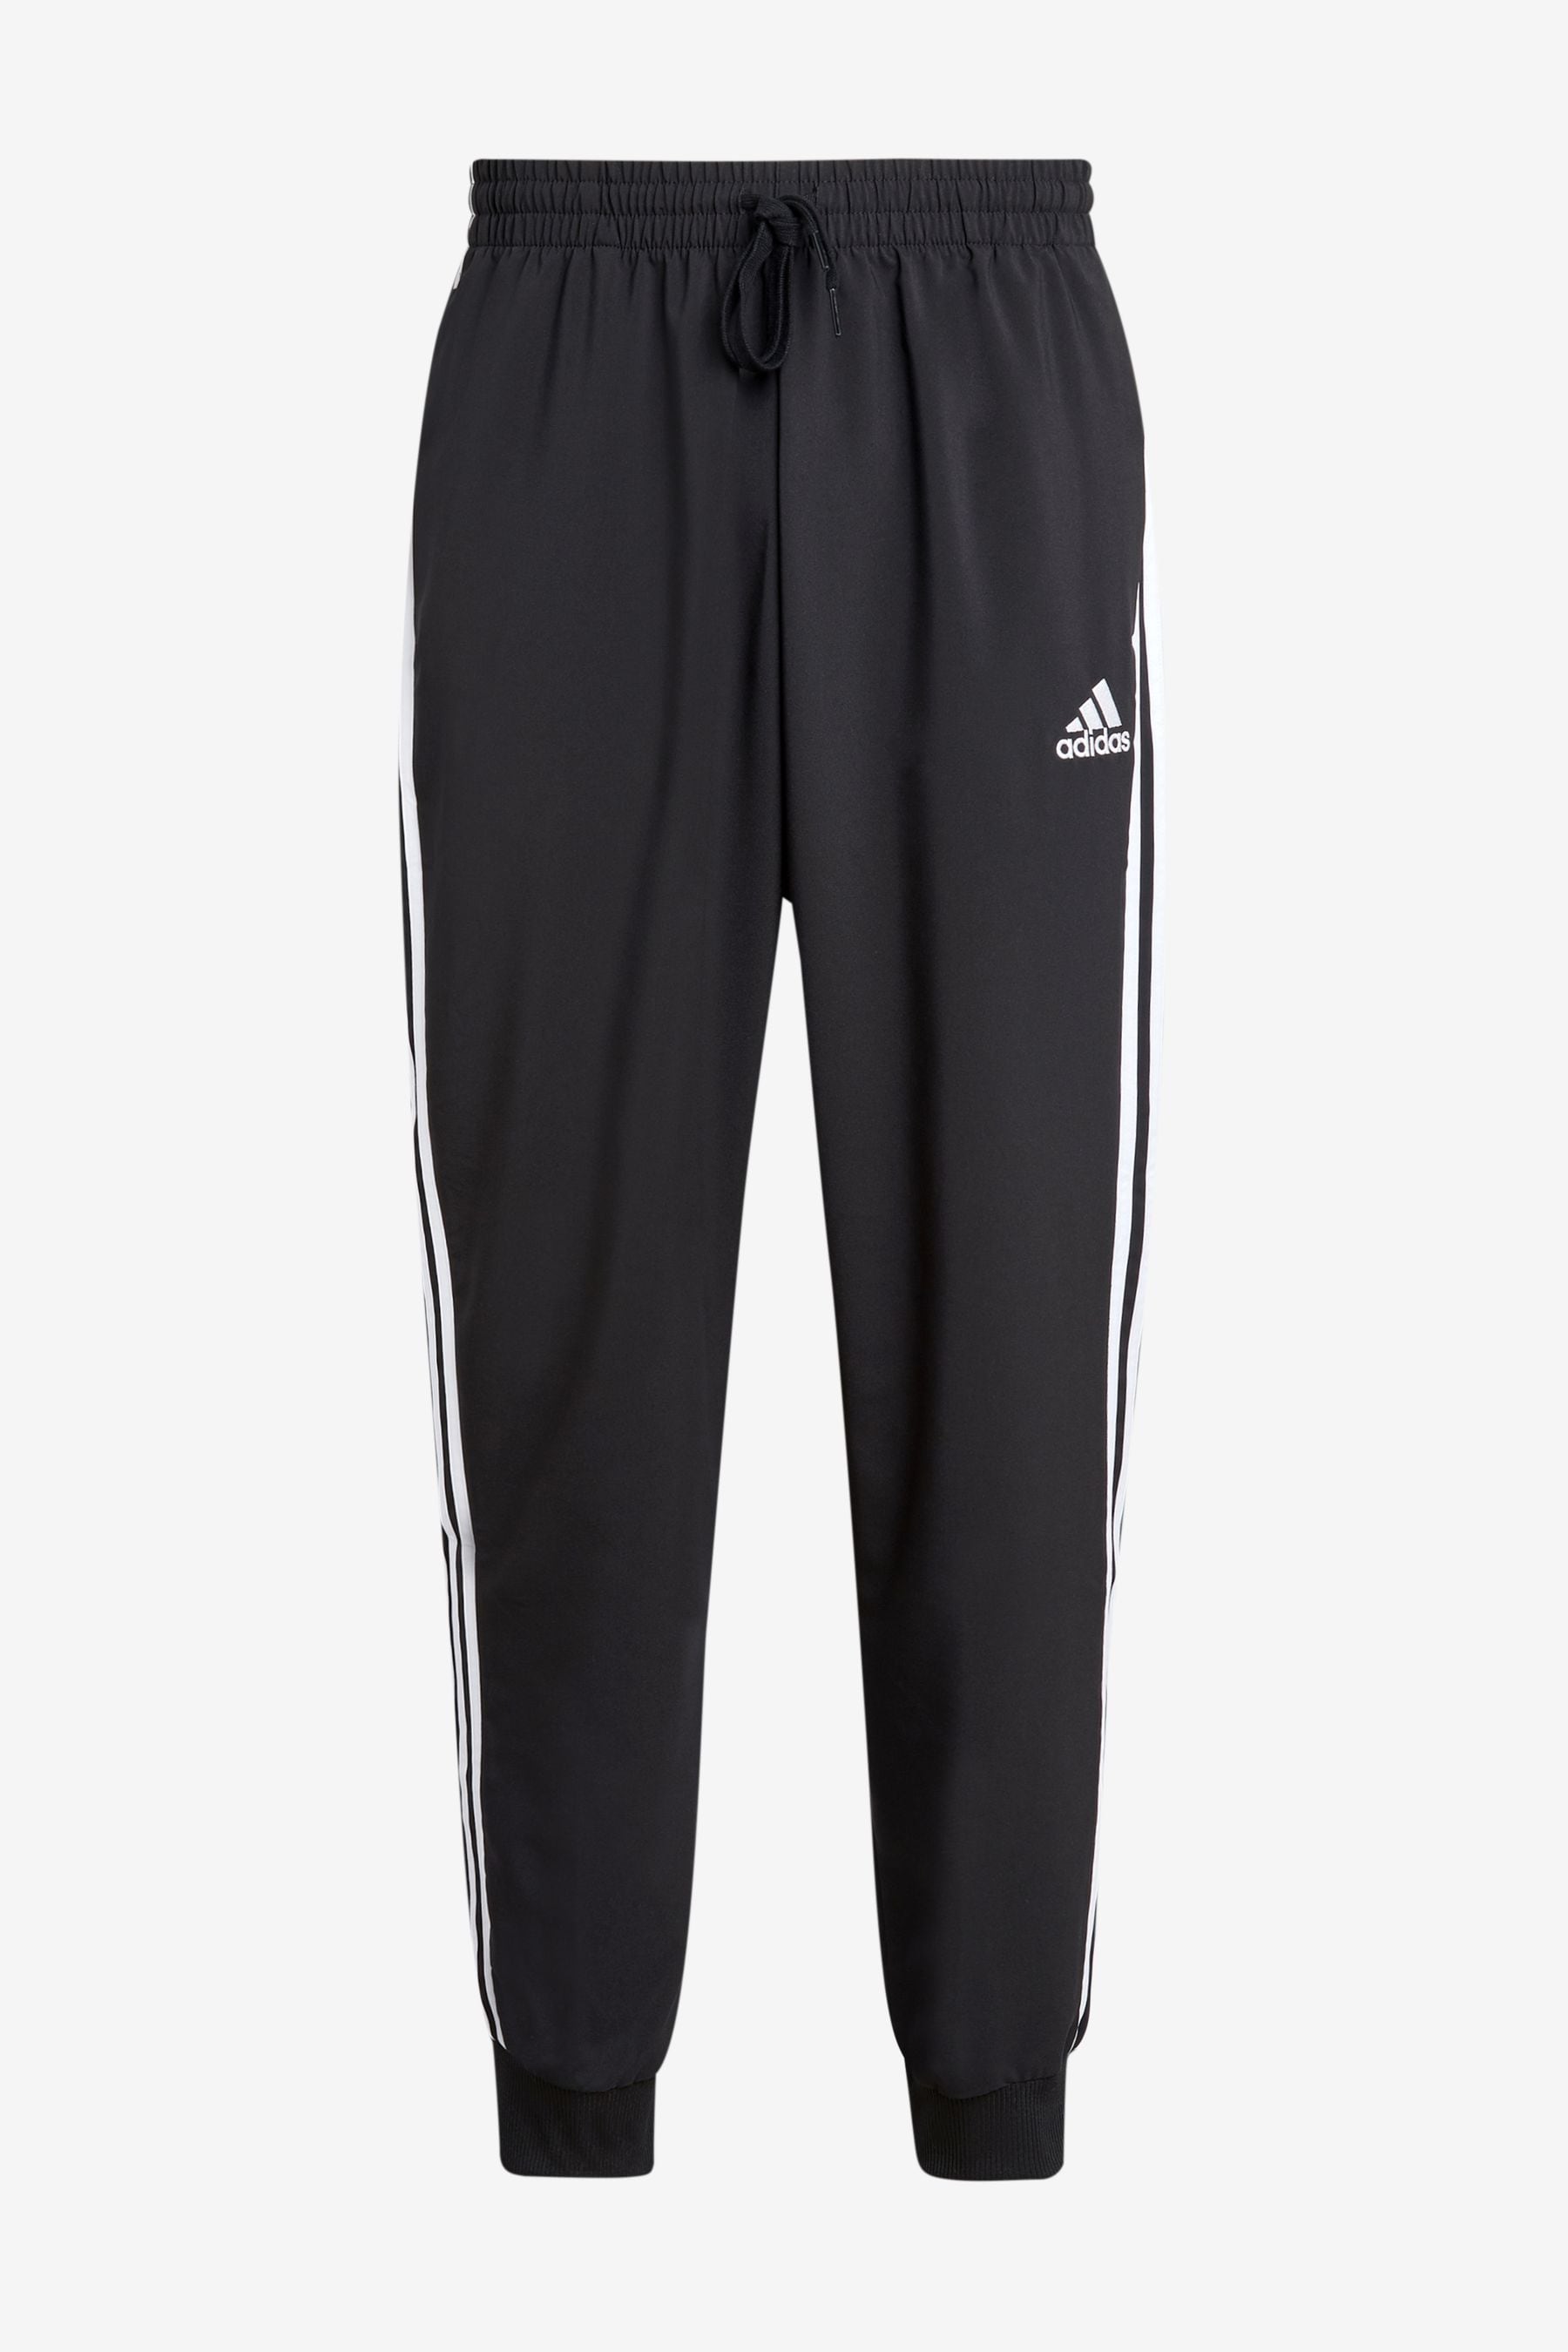 Buy adidas 3 Stripe Woven Joggers from the Next UK online shop